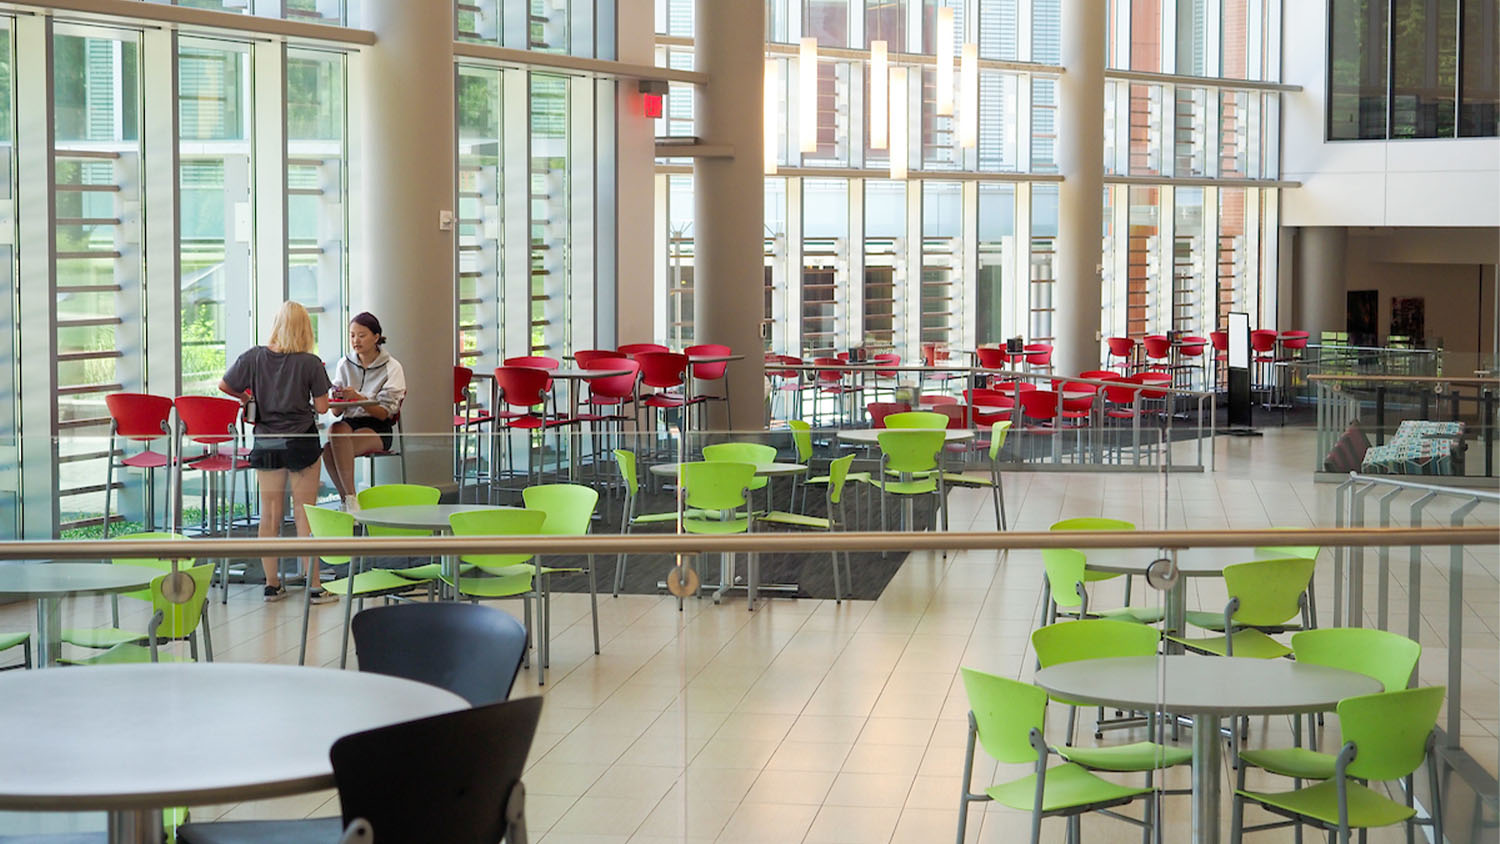 Two people sit at a table in the food court in Talley Student Union